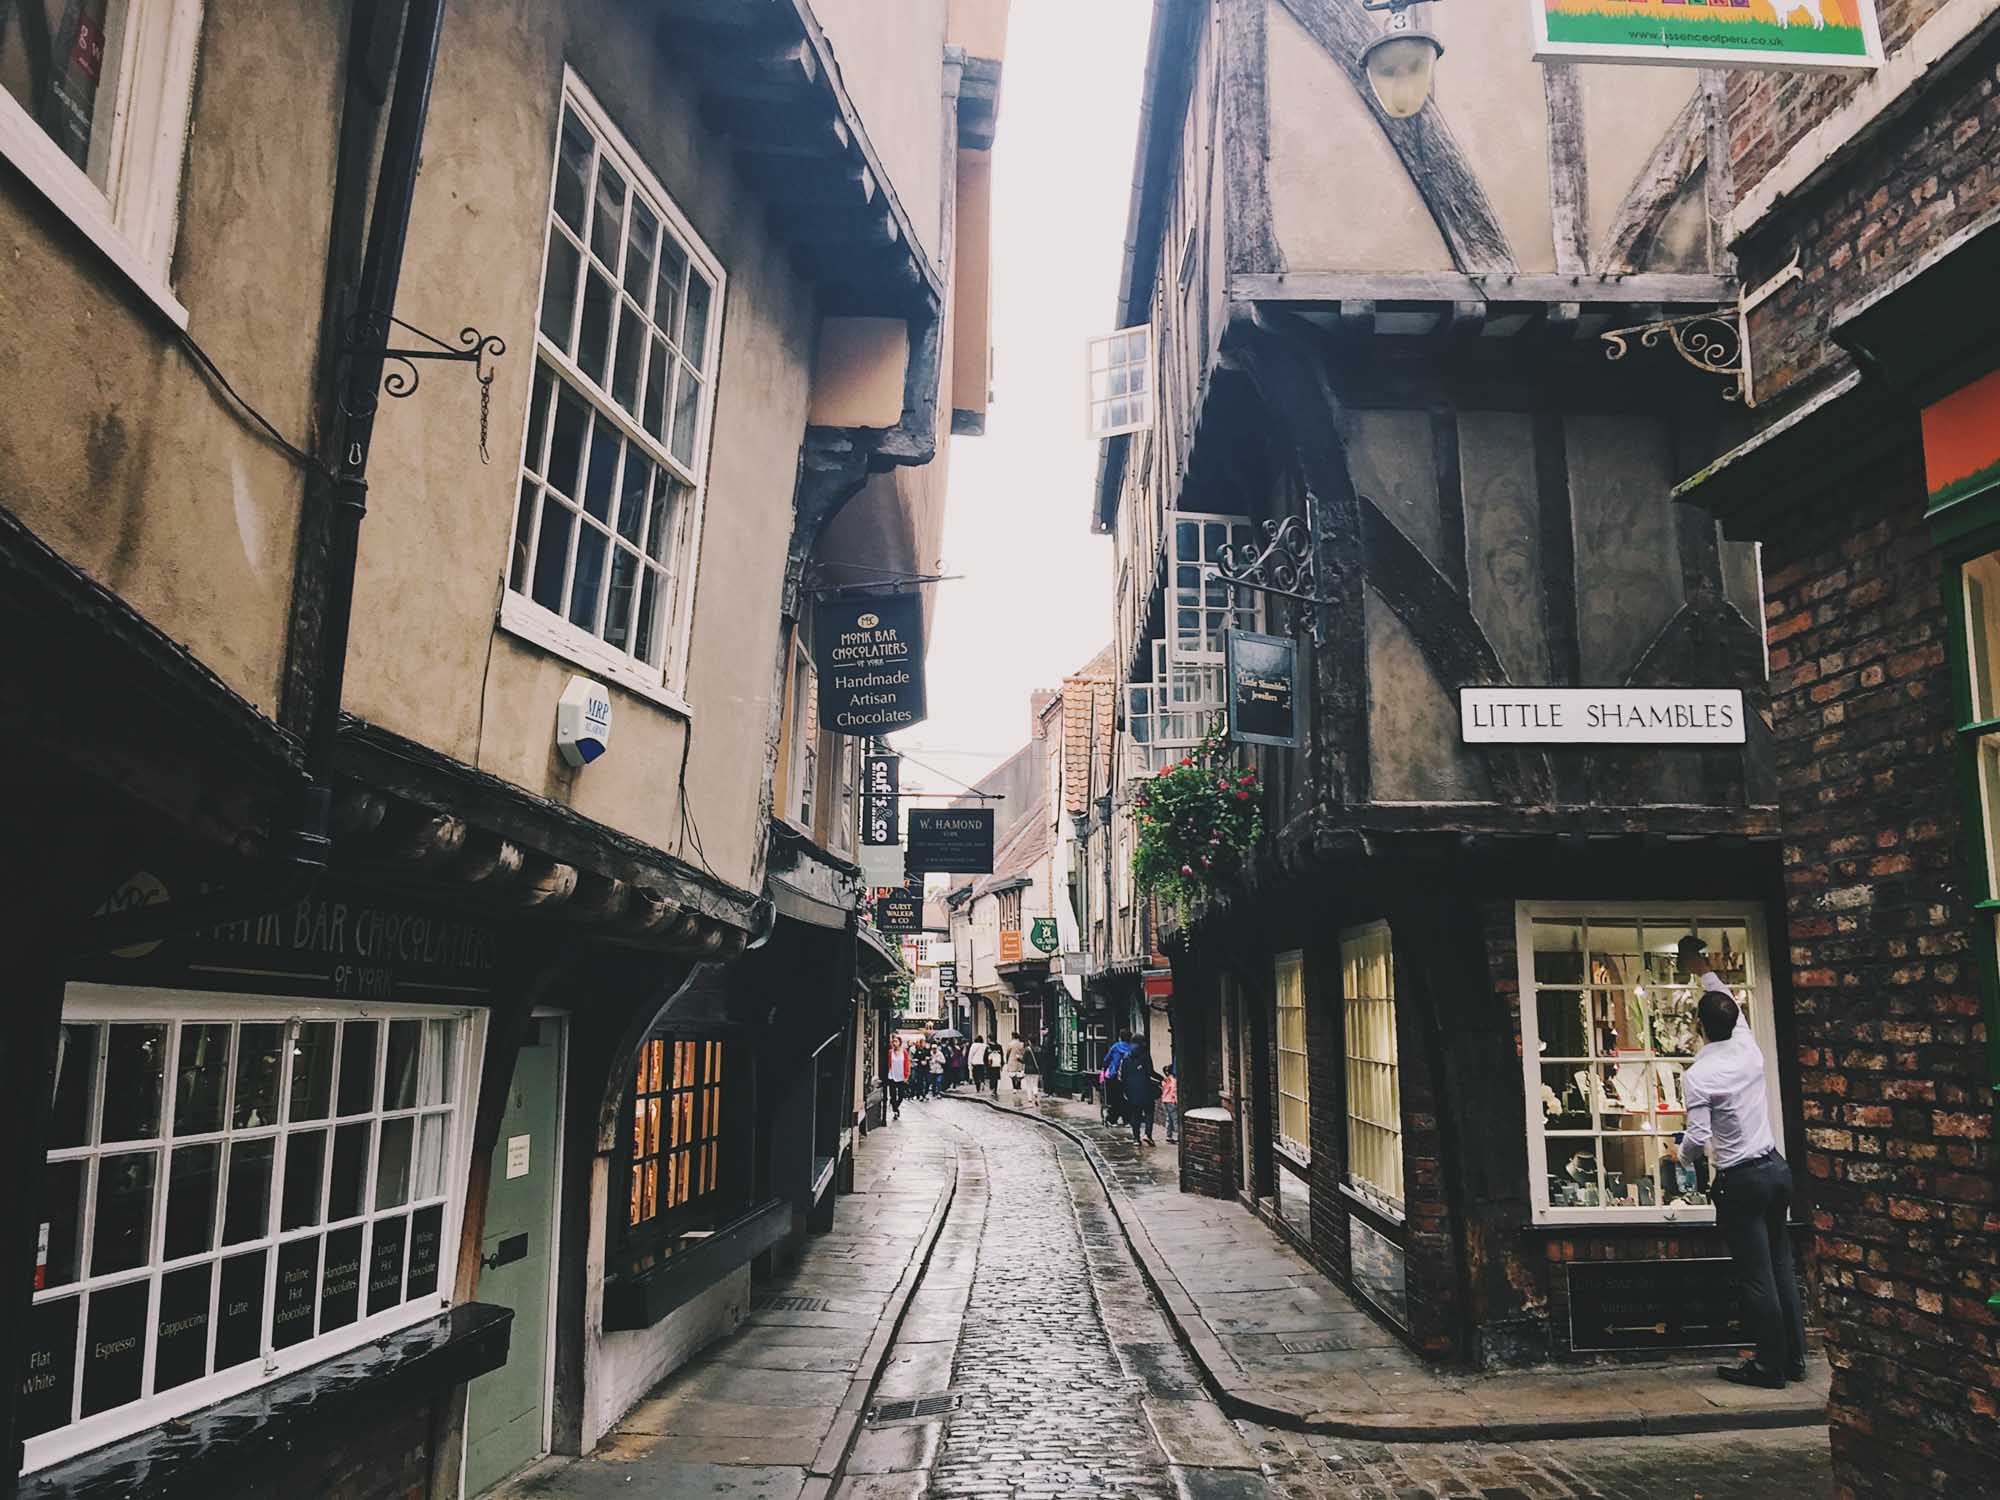 Best things to do in York - Visit the Shambles